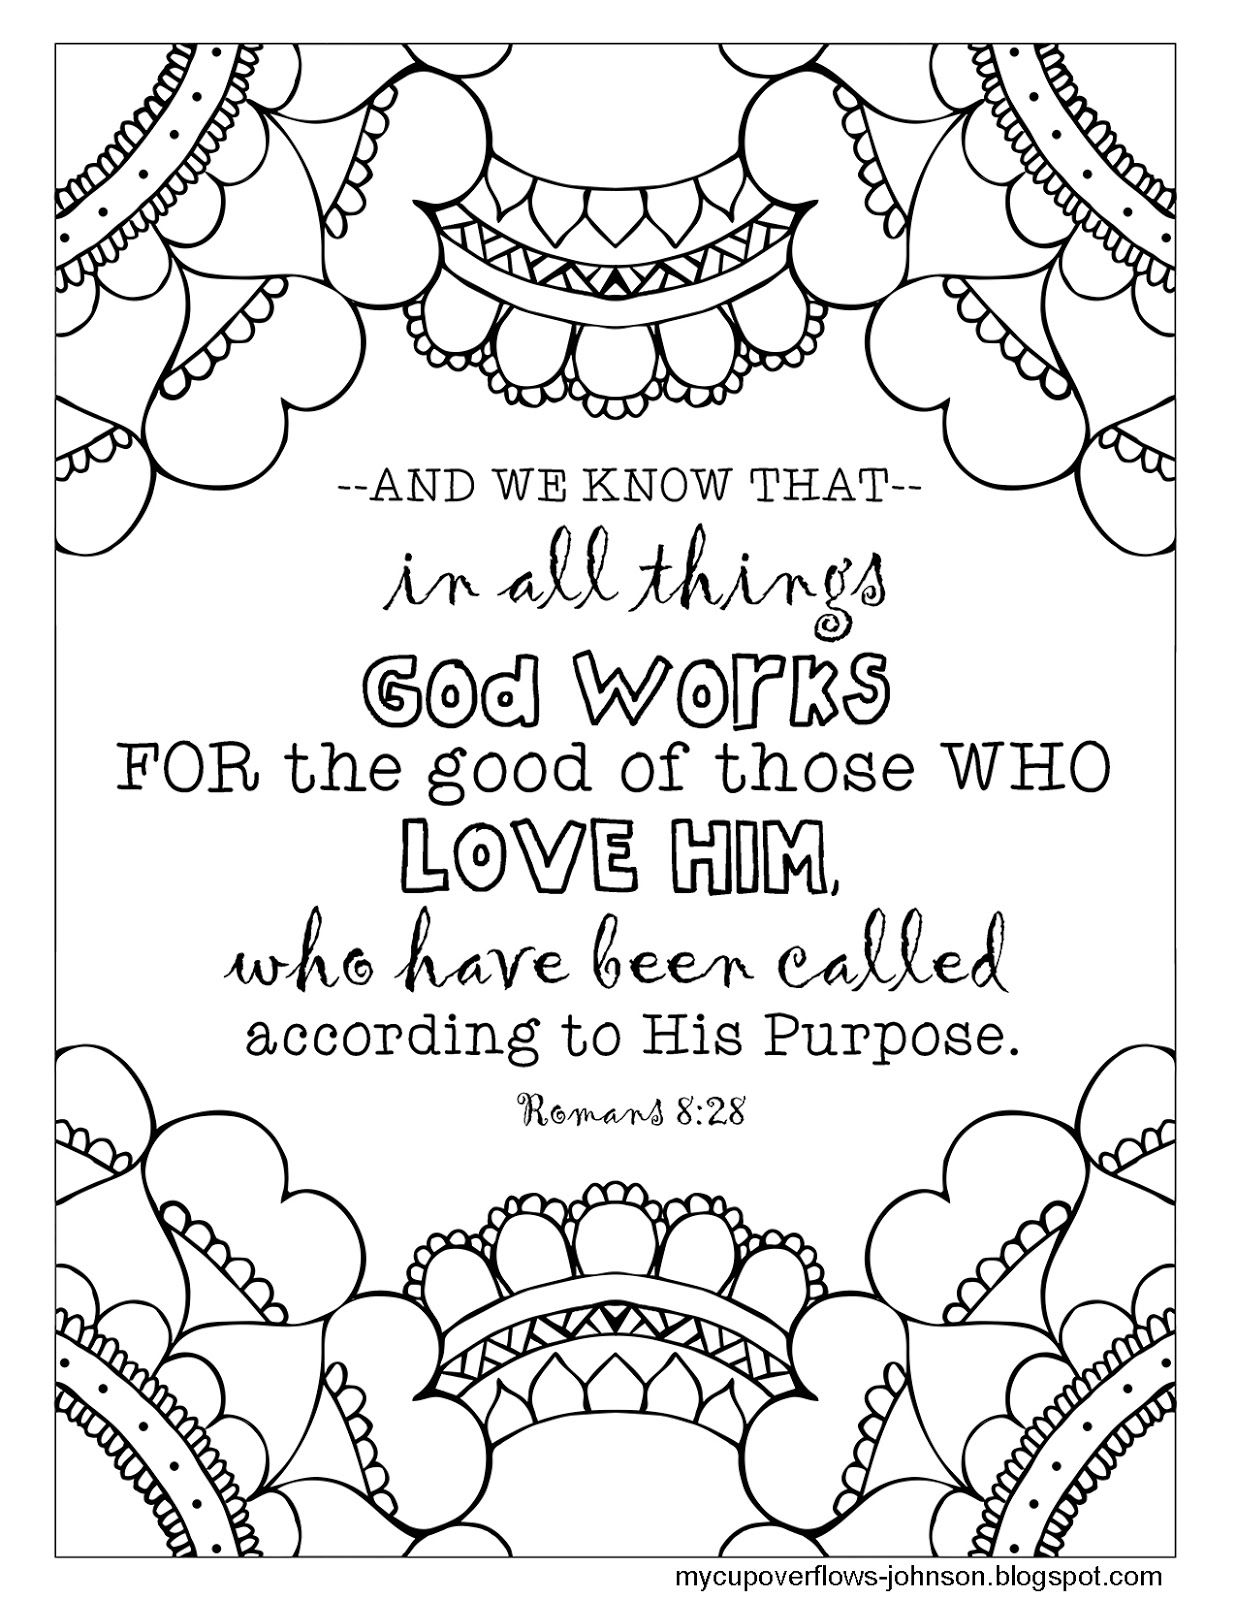 God Works for Our Good | Bible verse coloring, Scripture coloring, Bible  crafts